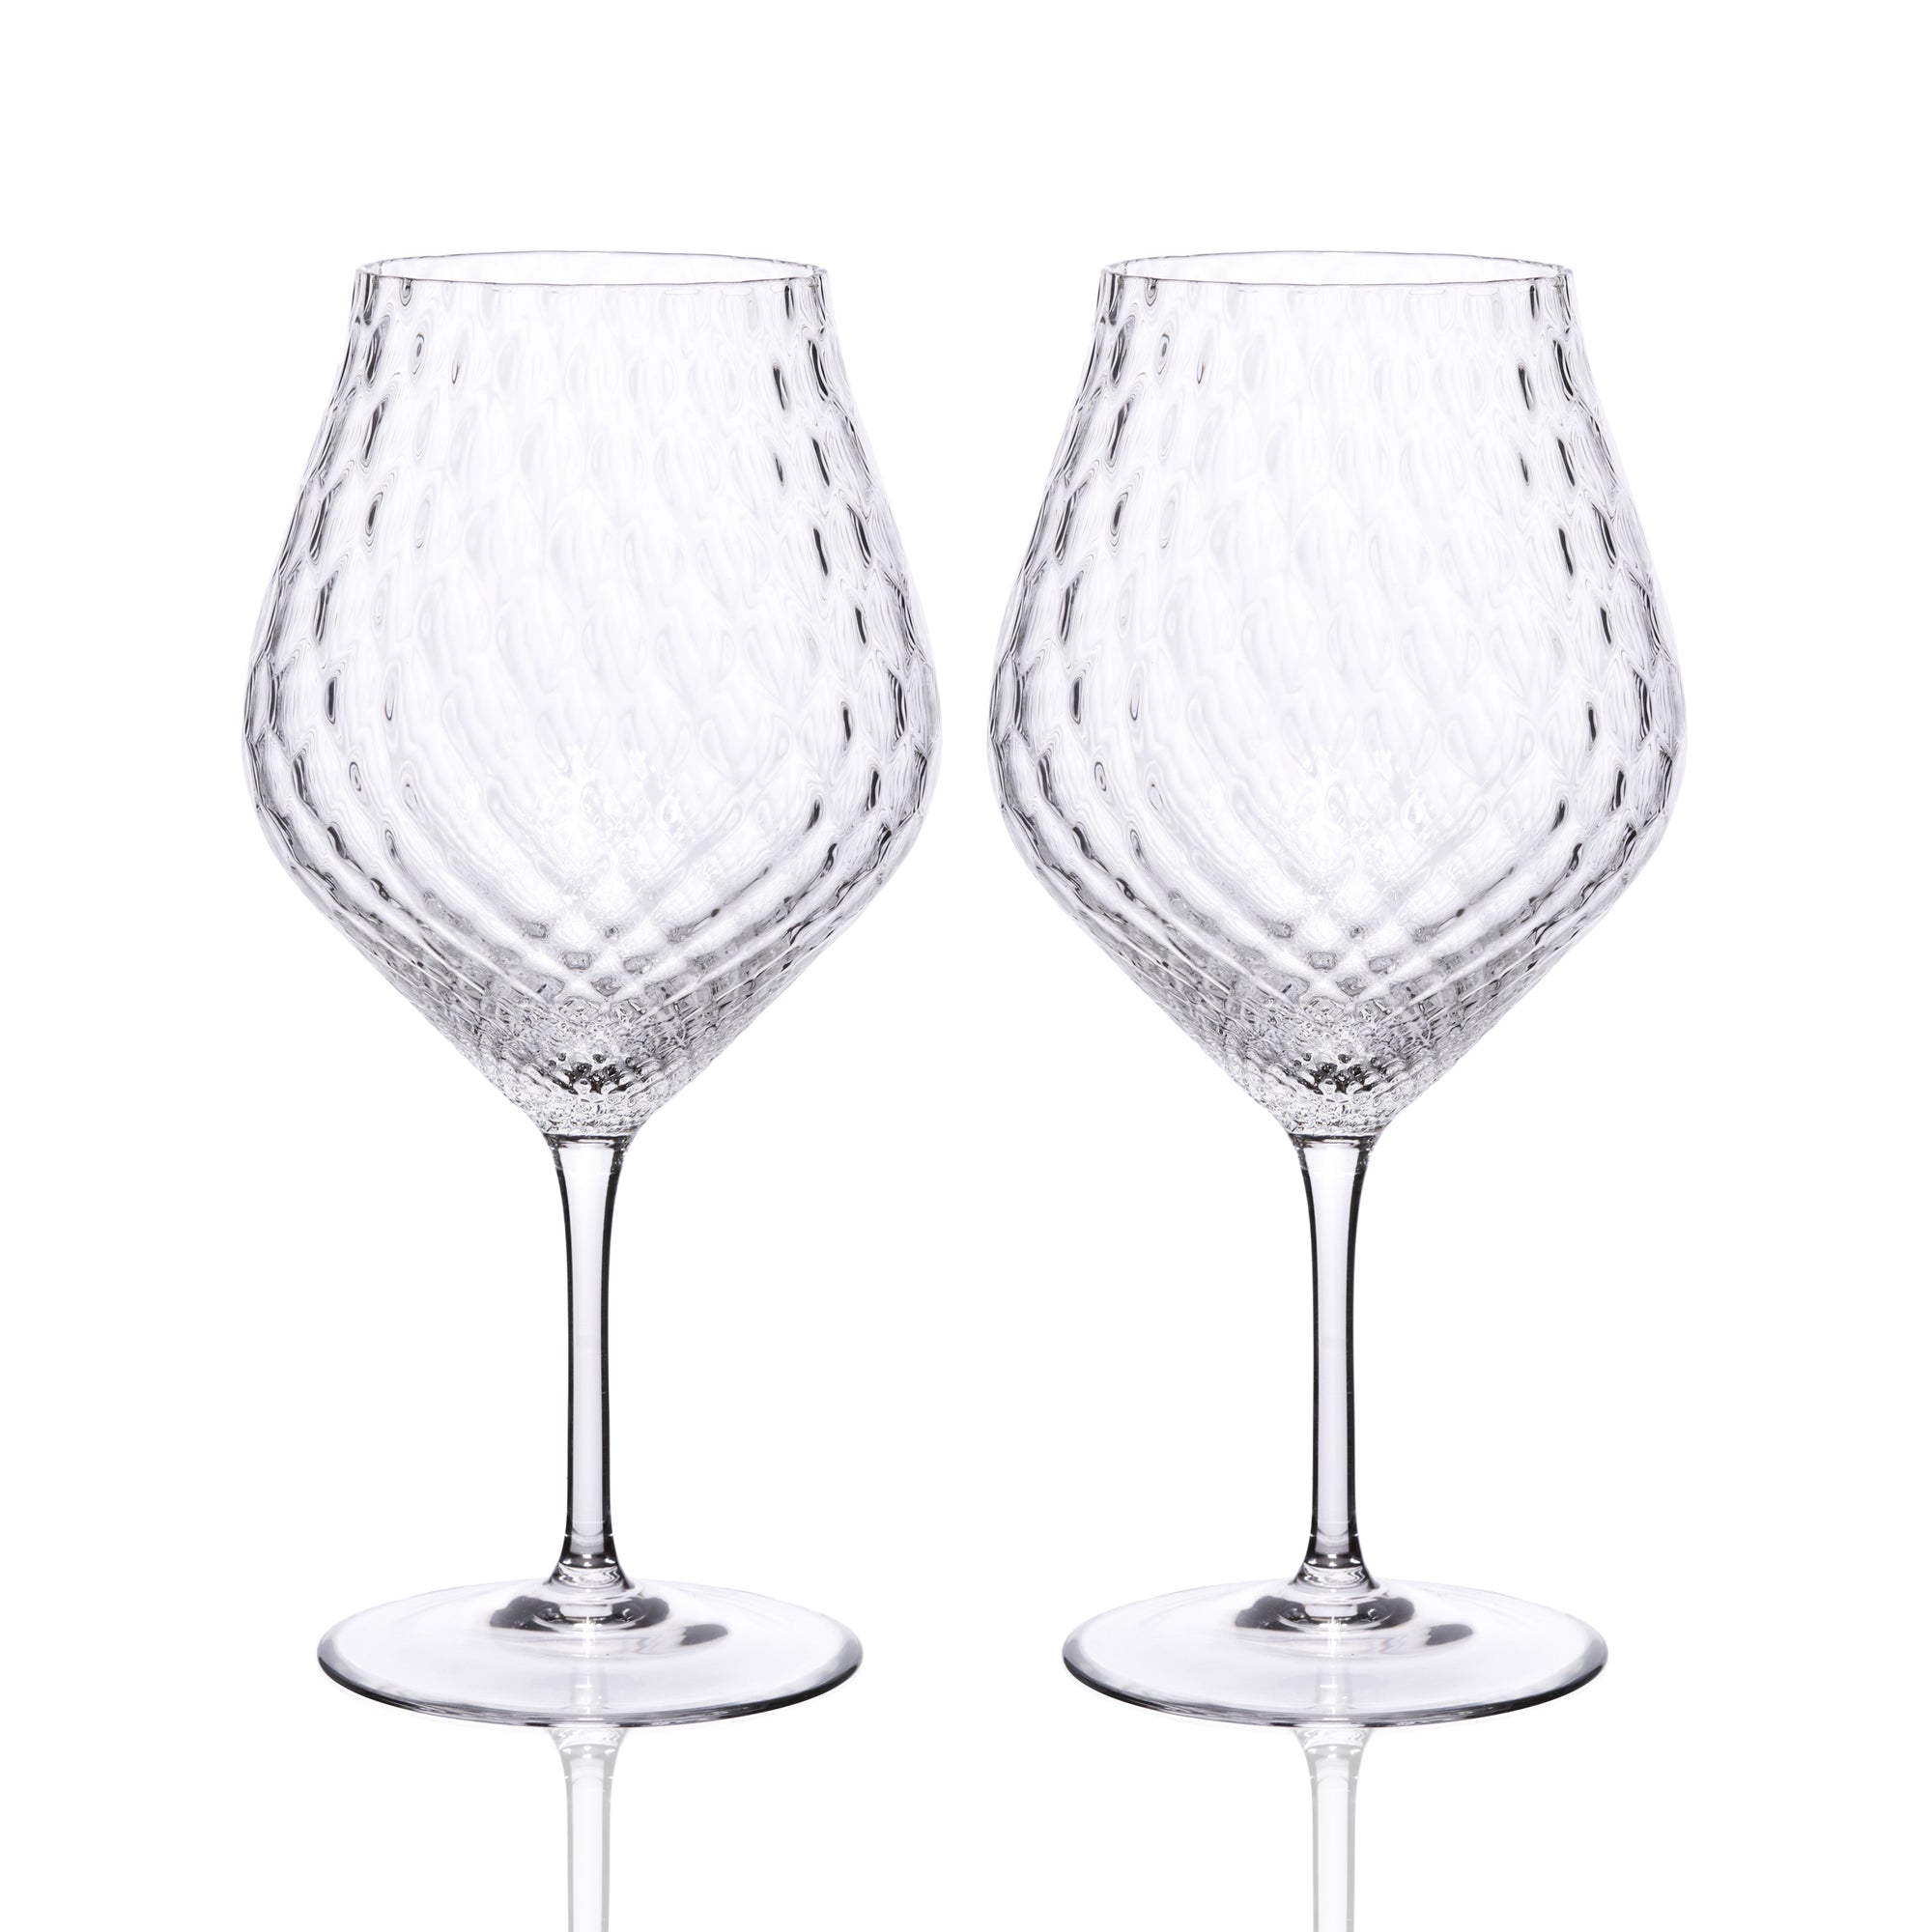 Phoebe clear tulip universal crystal wine glass from Caskata.